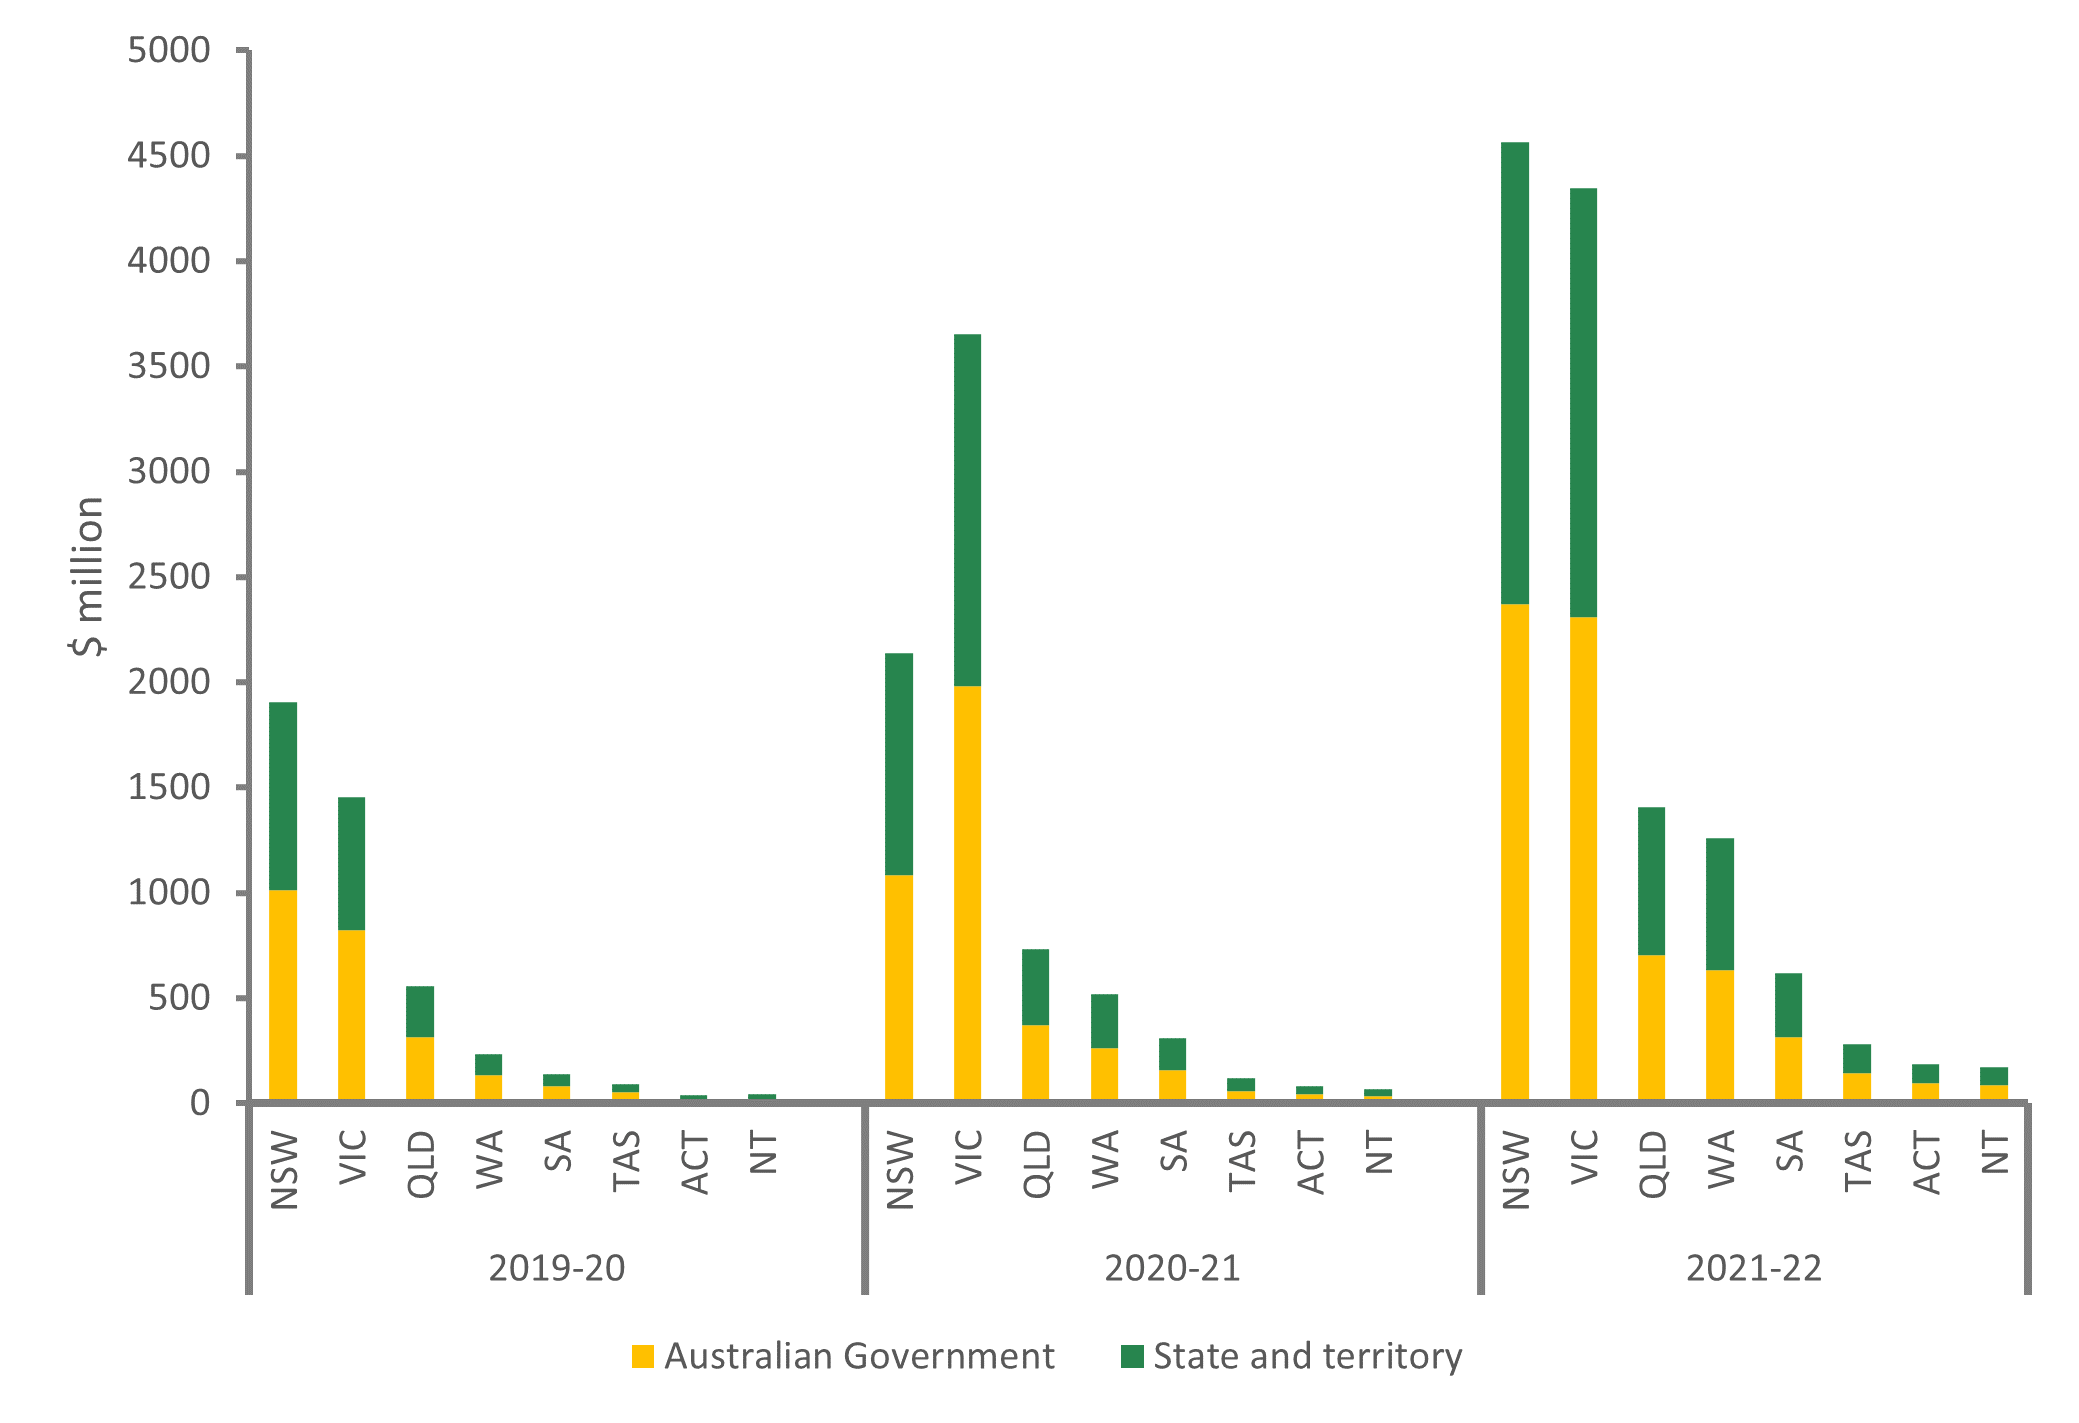 The stacked column chart shows NPCR payments by Australian government and state and territory governments to all the state and territories from 2019-20 to 2021-22. The payments increased each year, which NSW and Victoria having the highest payments while ACT and NT have the lowest payments.